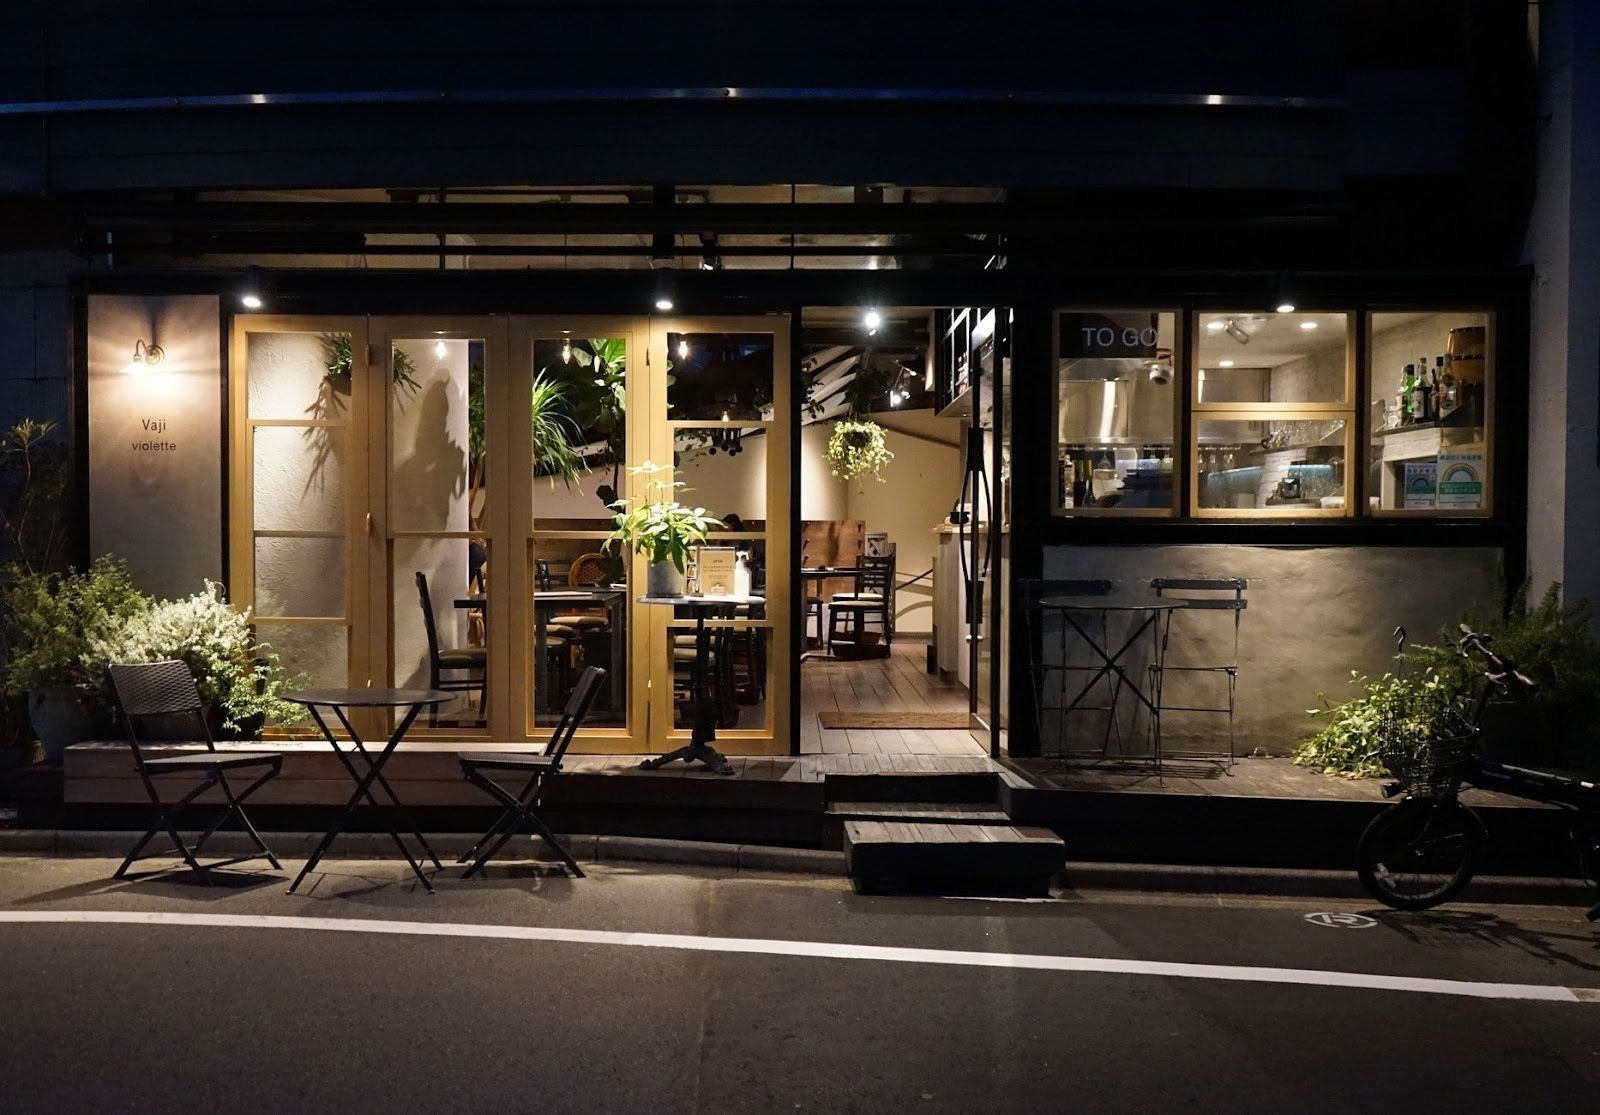 <span class="translation_missing" title="translation missing: en.meta.location_title, location_name: Vaji spice, city: Tokyo">Location Title</span>